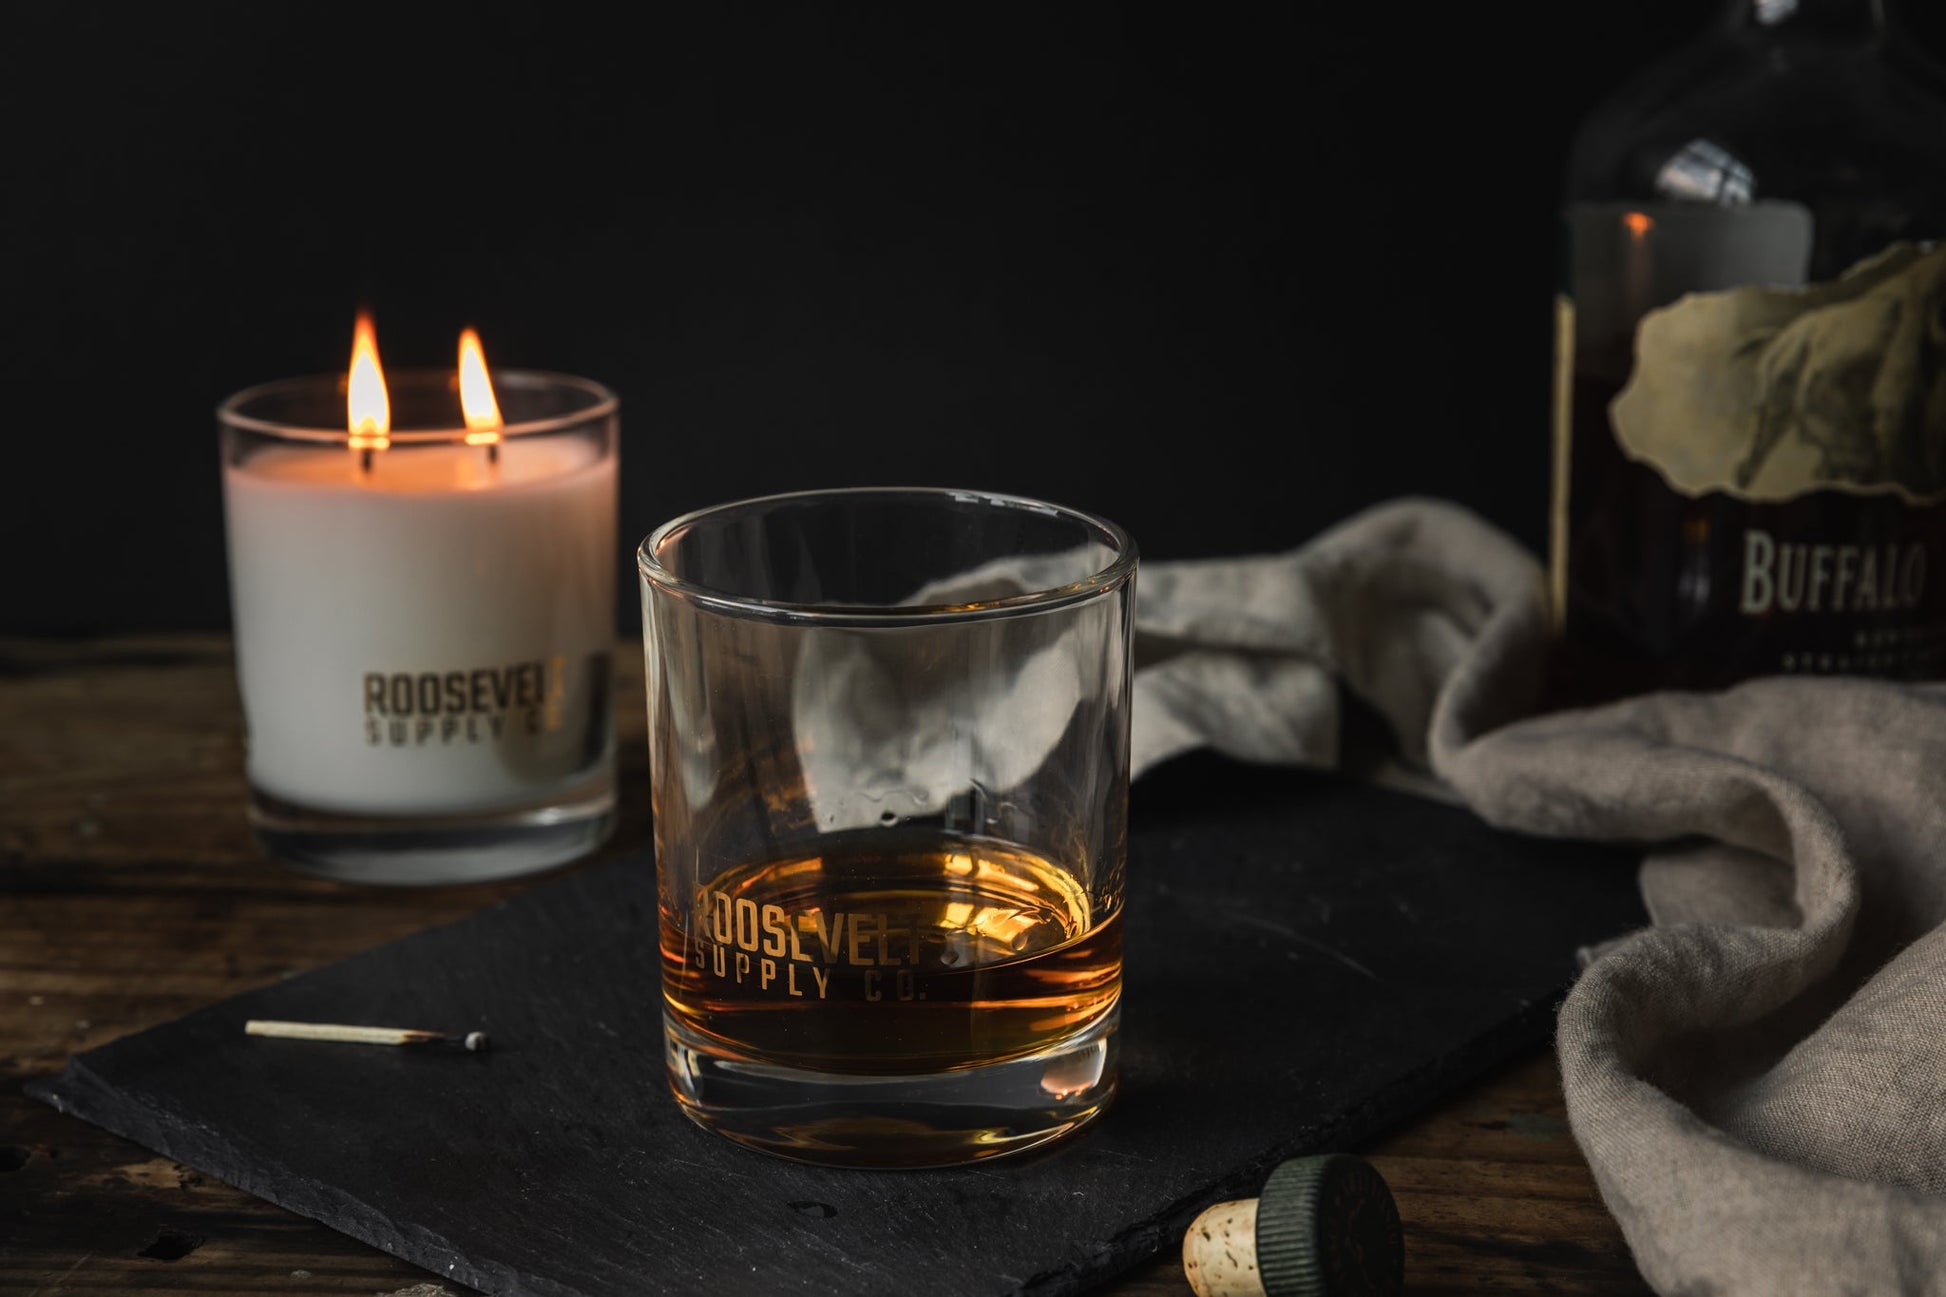 Ultimate Cocktail Glass Candle gift set - Roosevelt Supply Co.